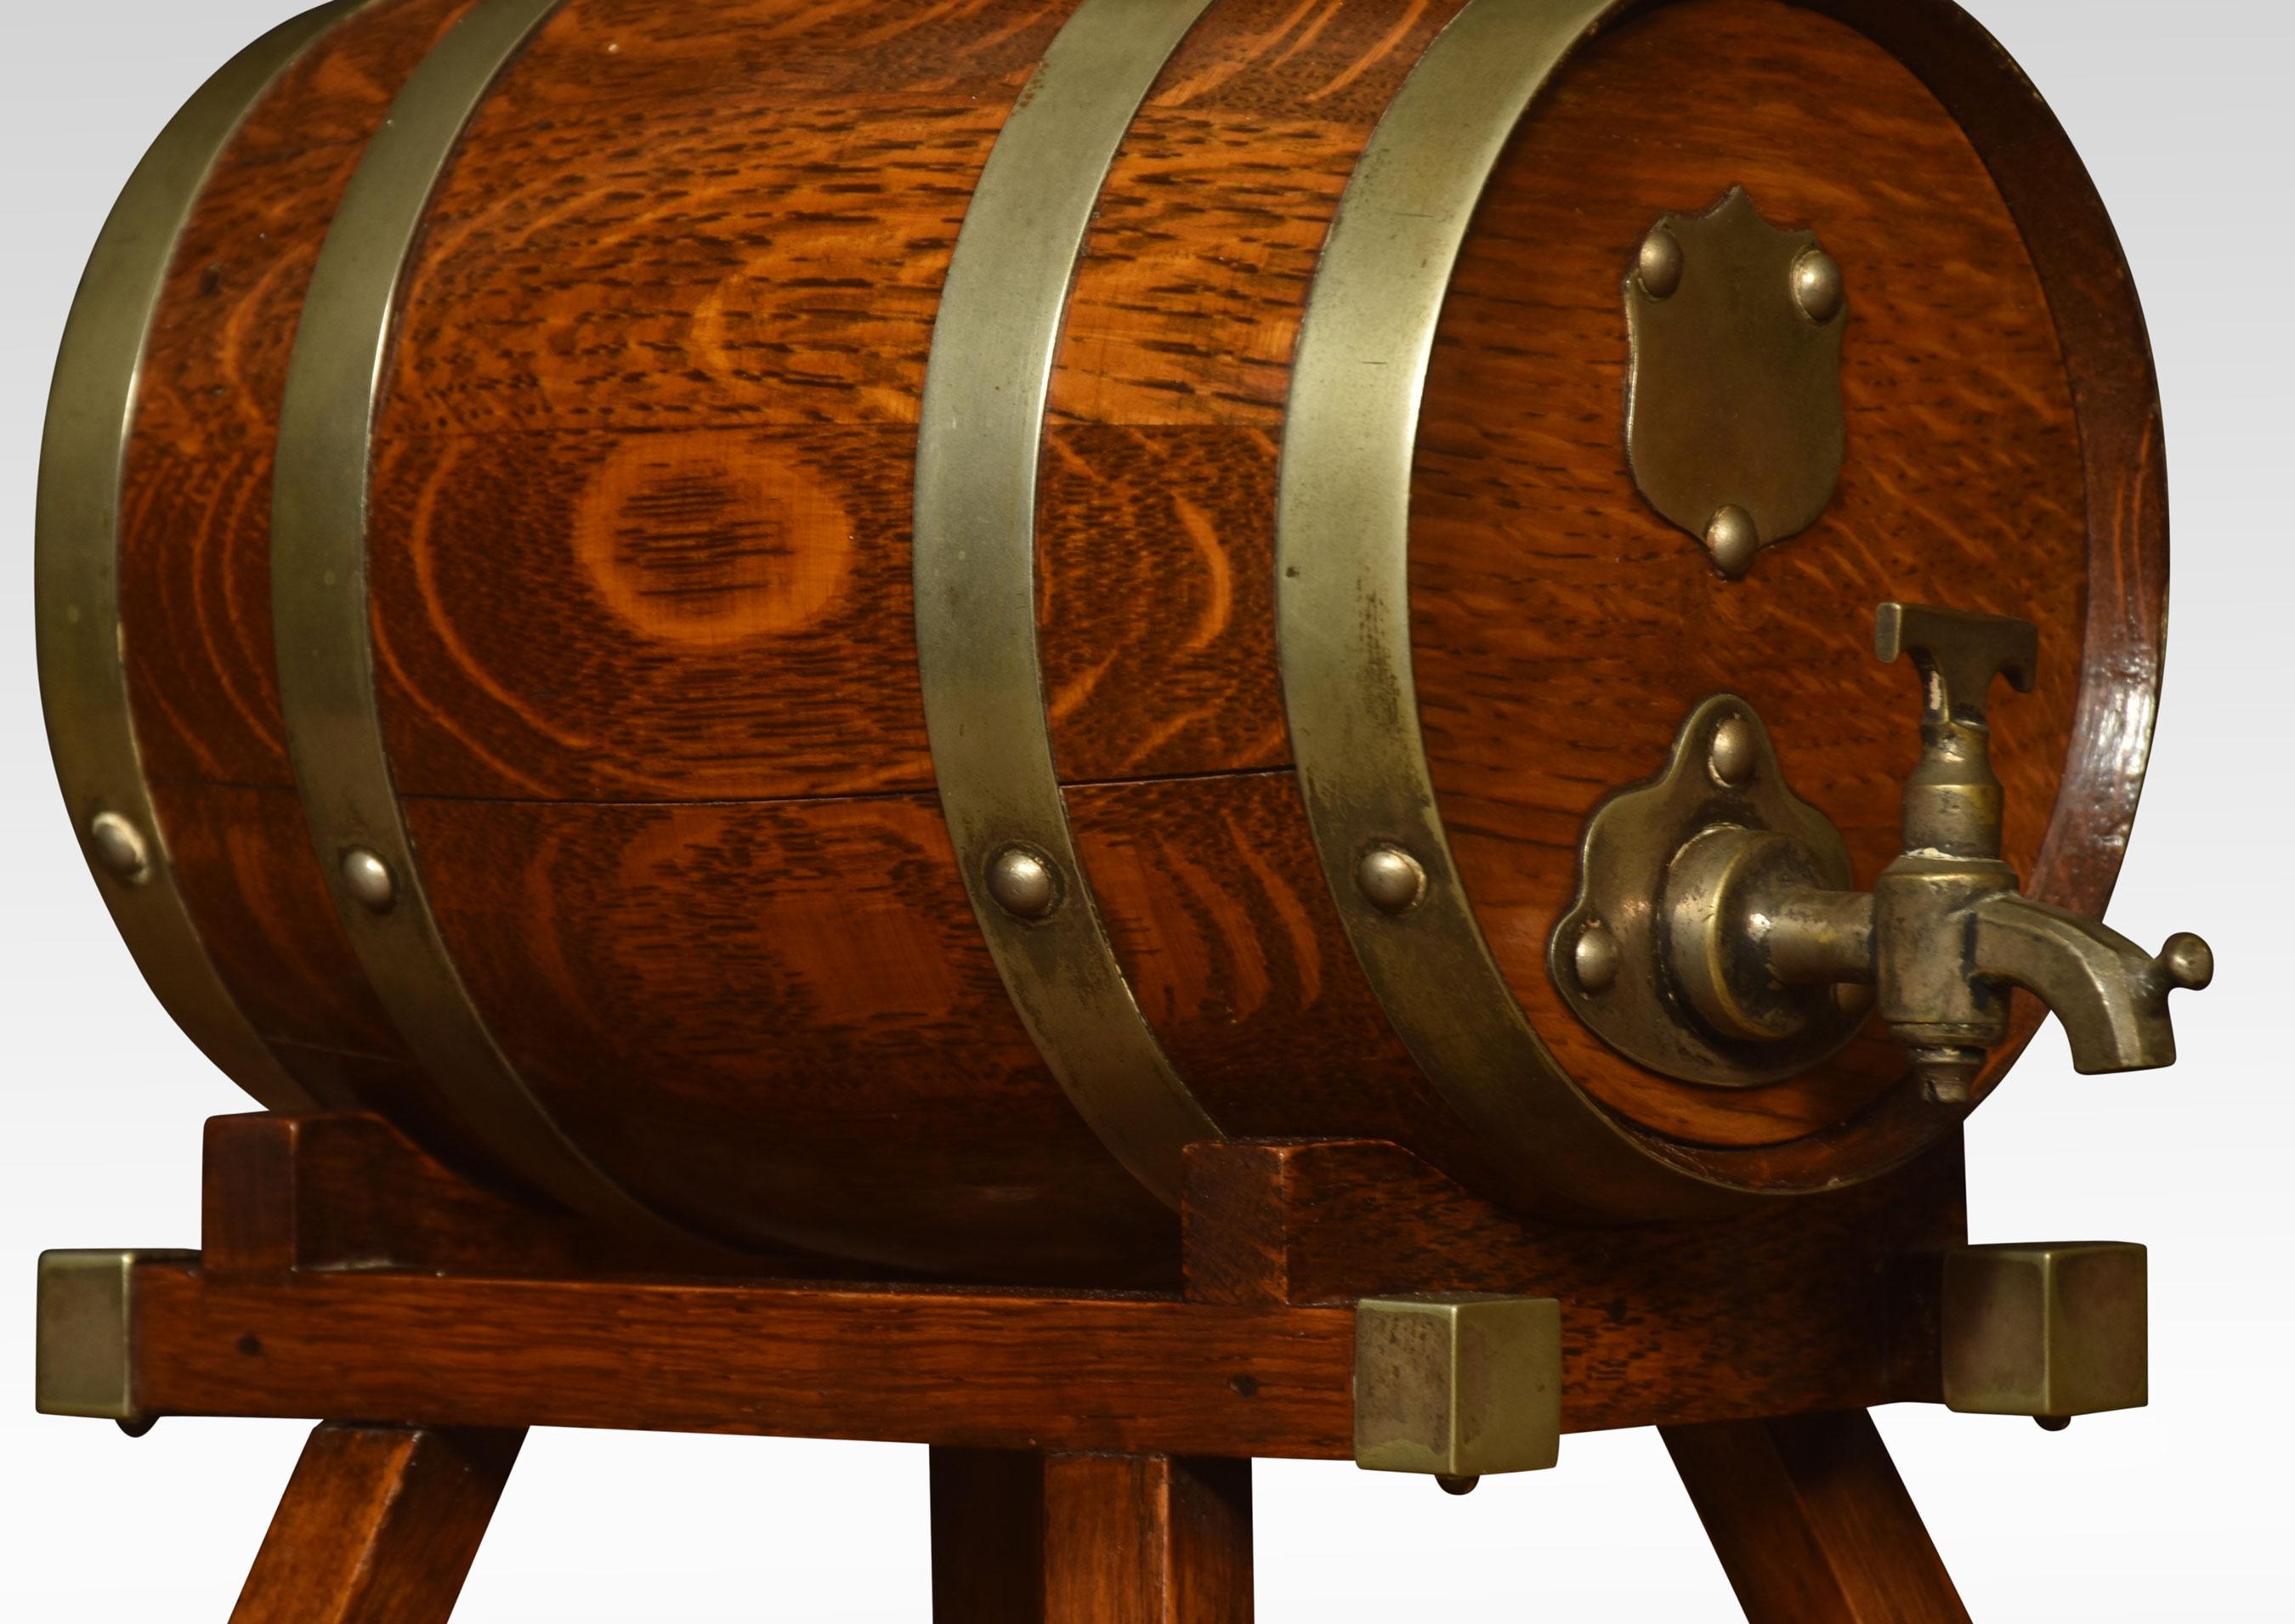 Pair of coopered oak spirit barrels the brass bindings with silver plated mounts, raised up on stylised bases, having stoneware pottery linings.
Dimensions
height 10 inches
width 6.5 inches
depth 9.5 inches